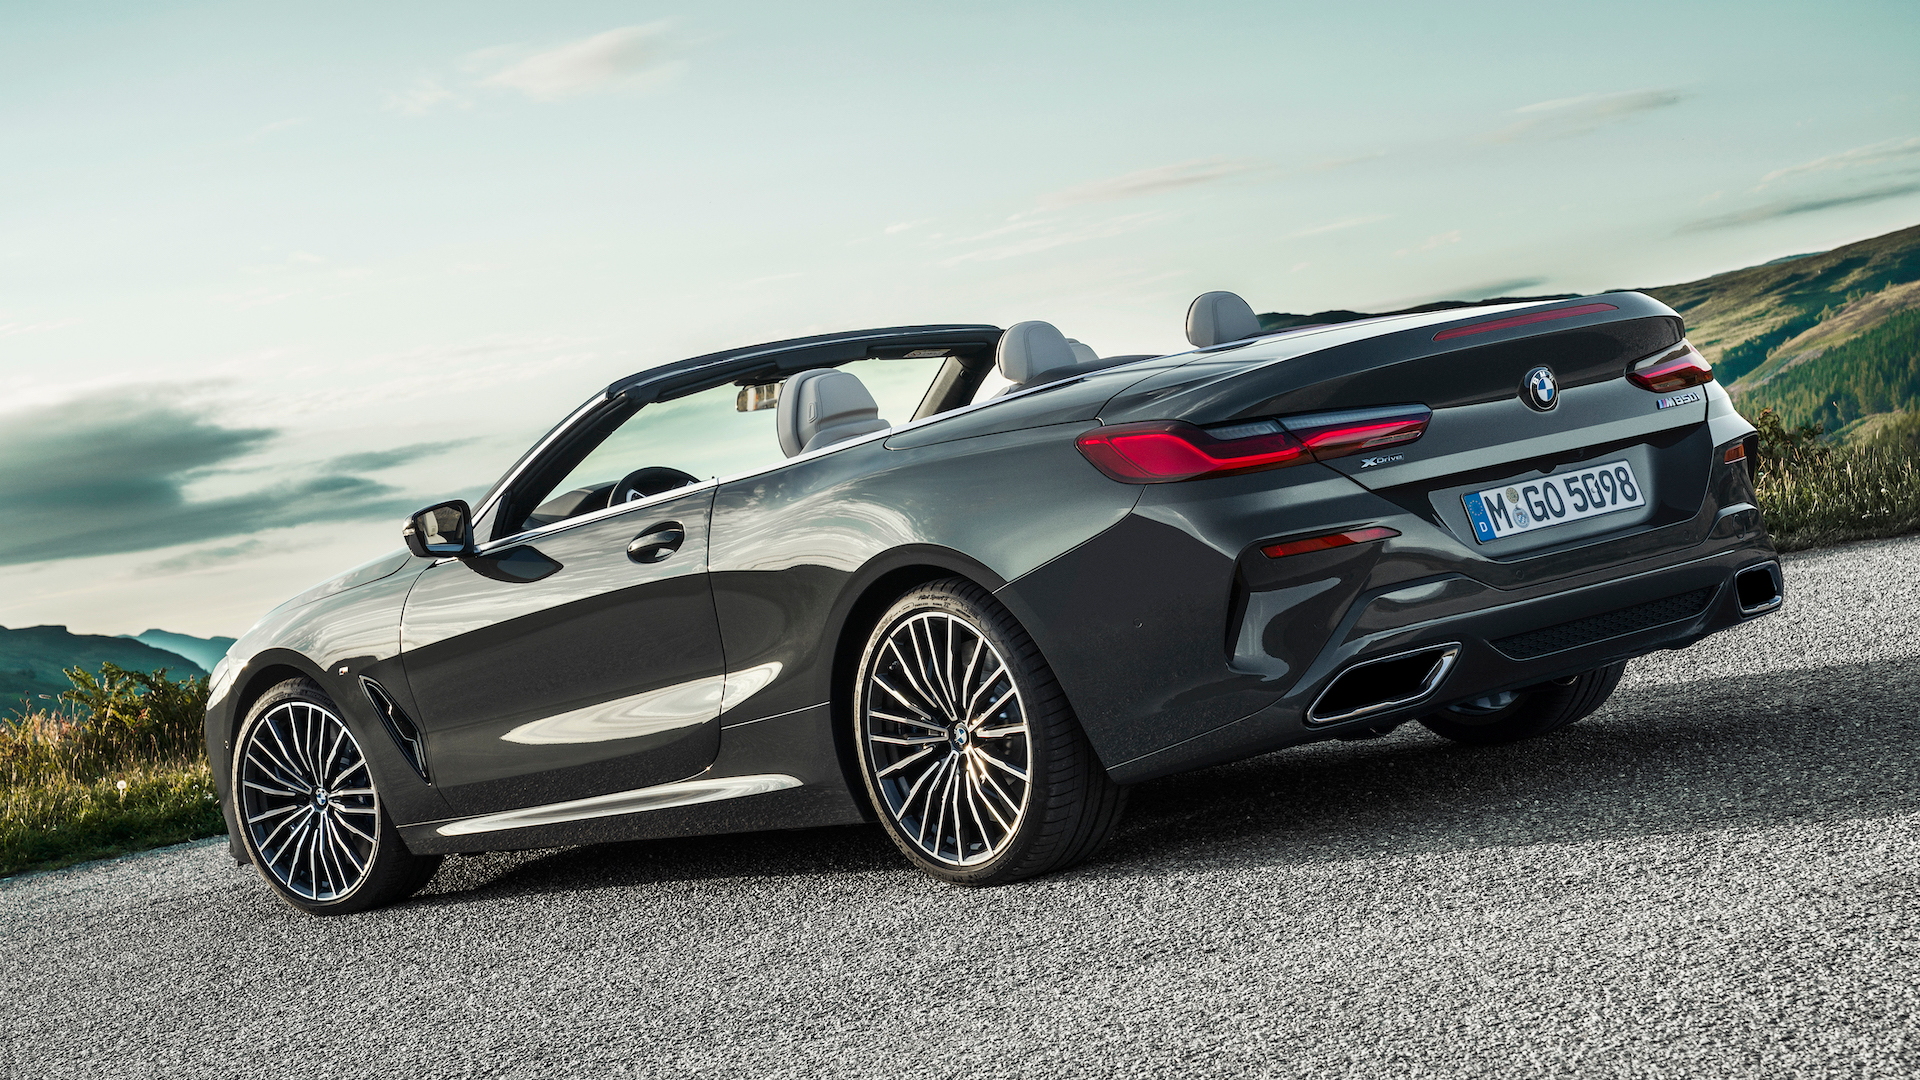 First drive review: 2019 BMW M850i xDrive convertible goes big on